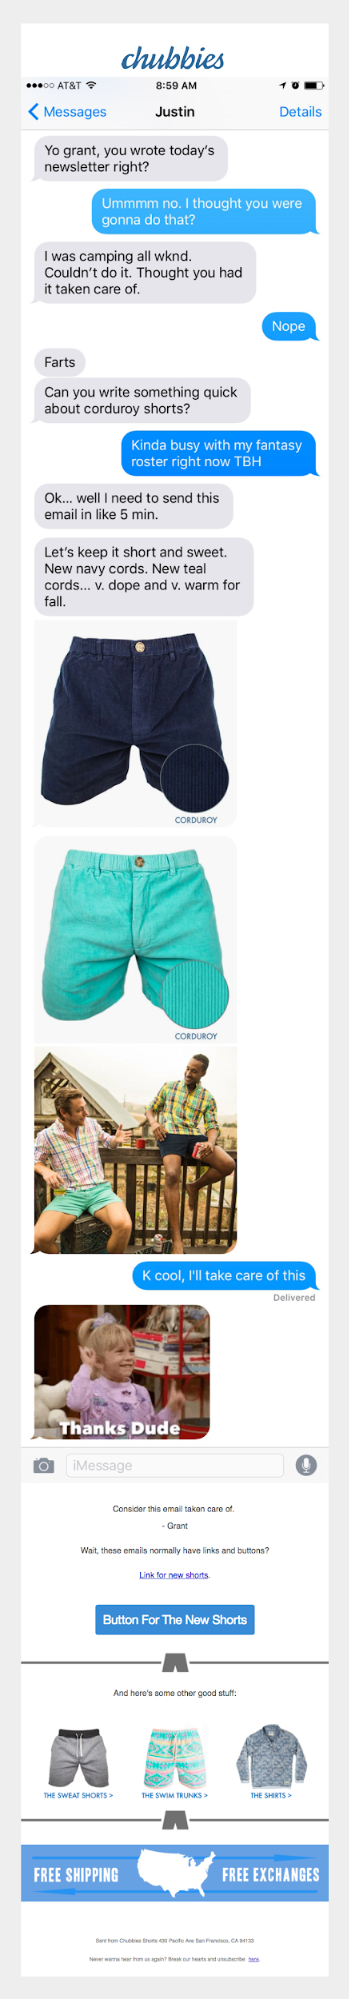 Example of a text conversation used to create a story around a new product launch for Chubbies